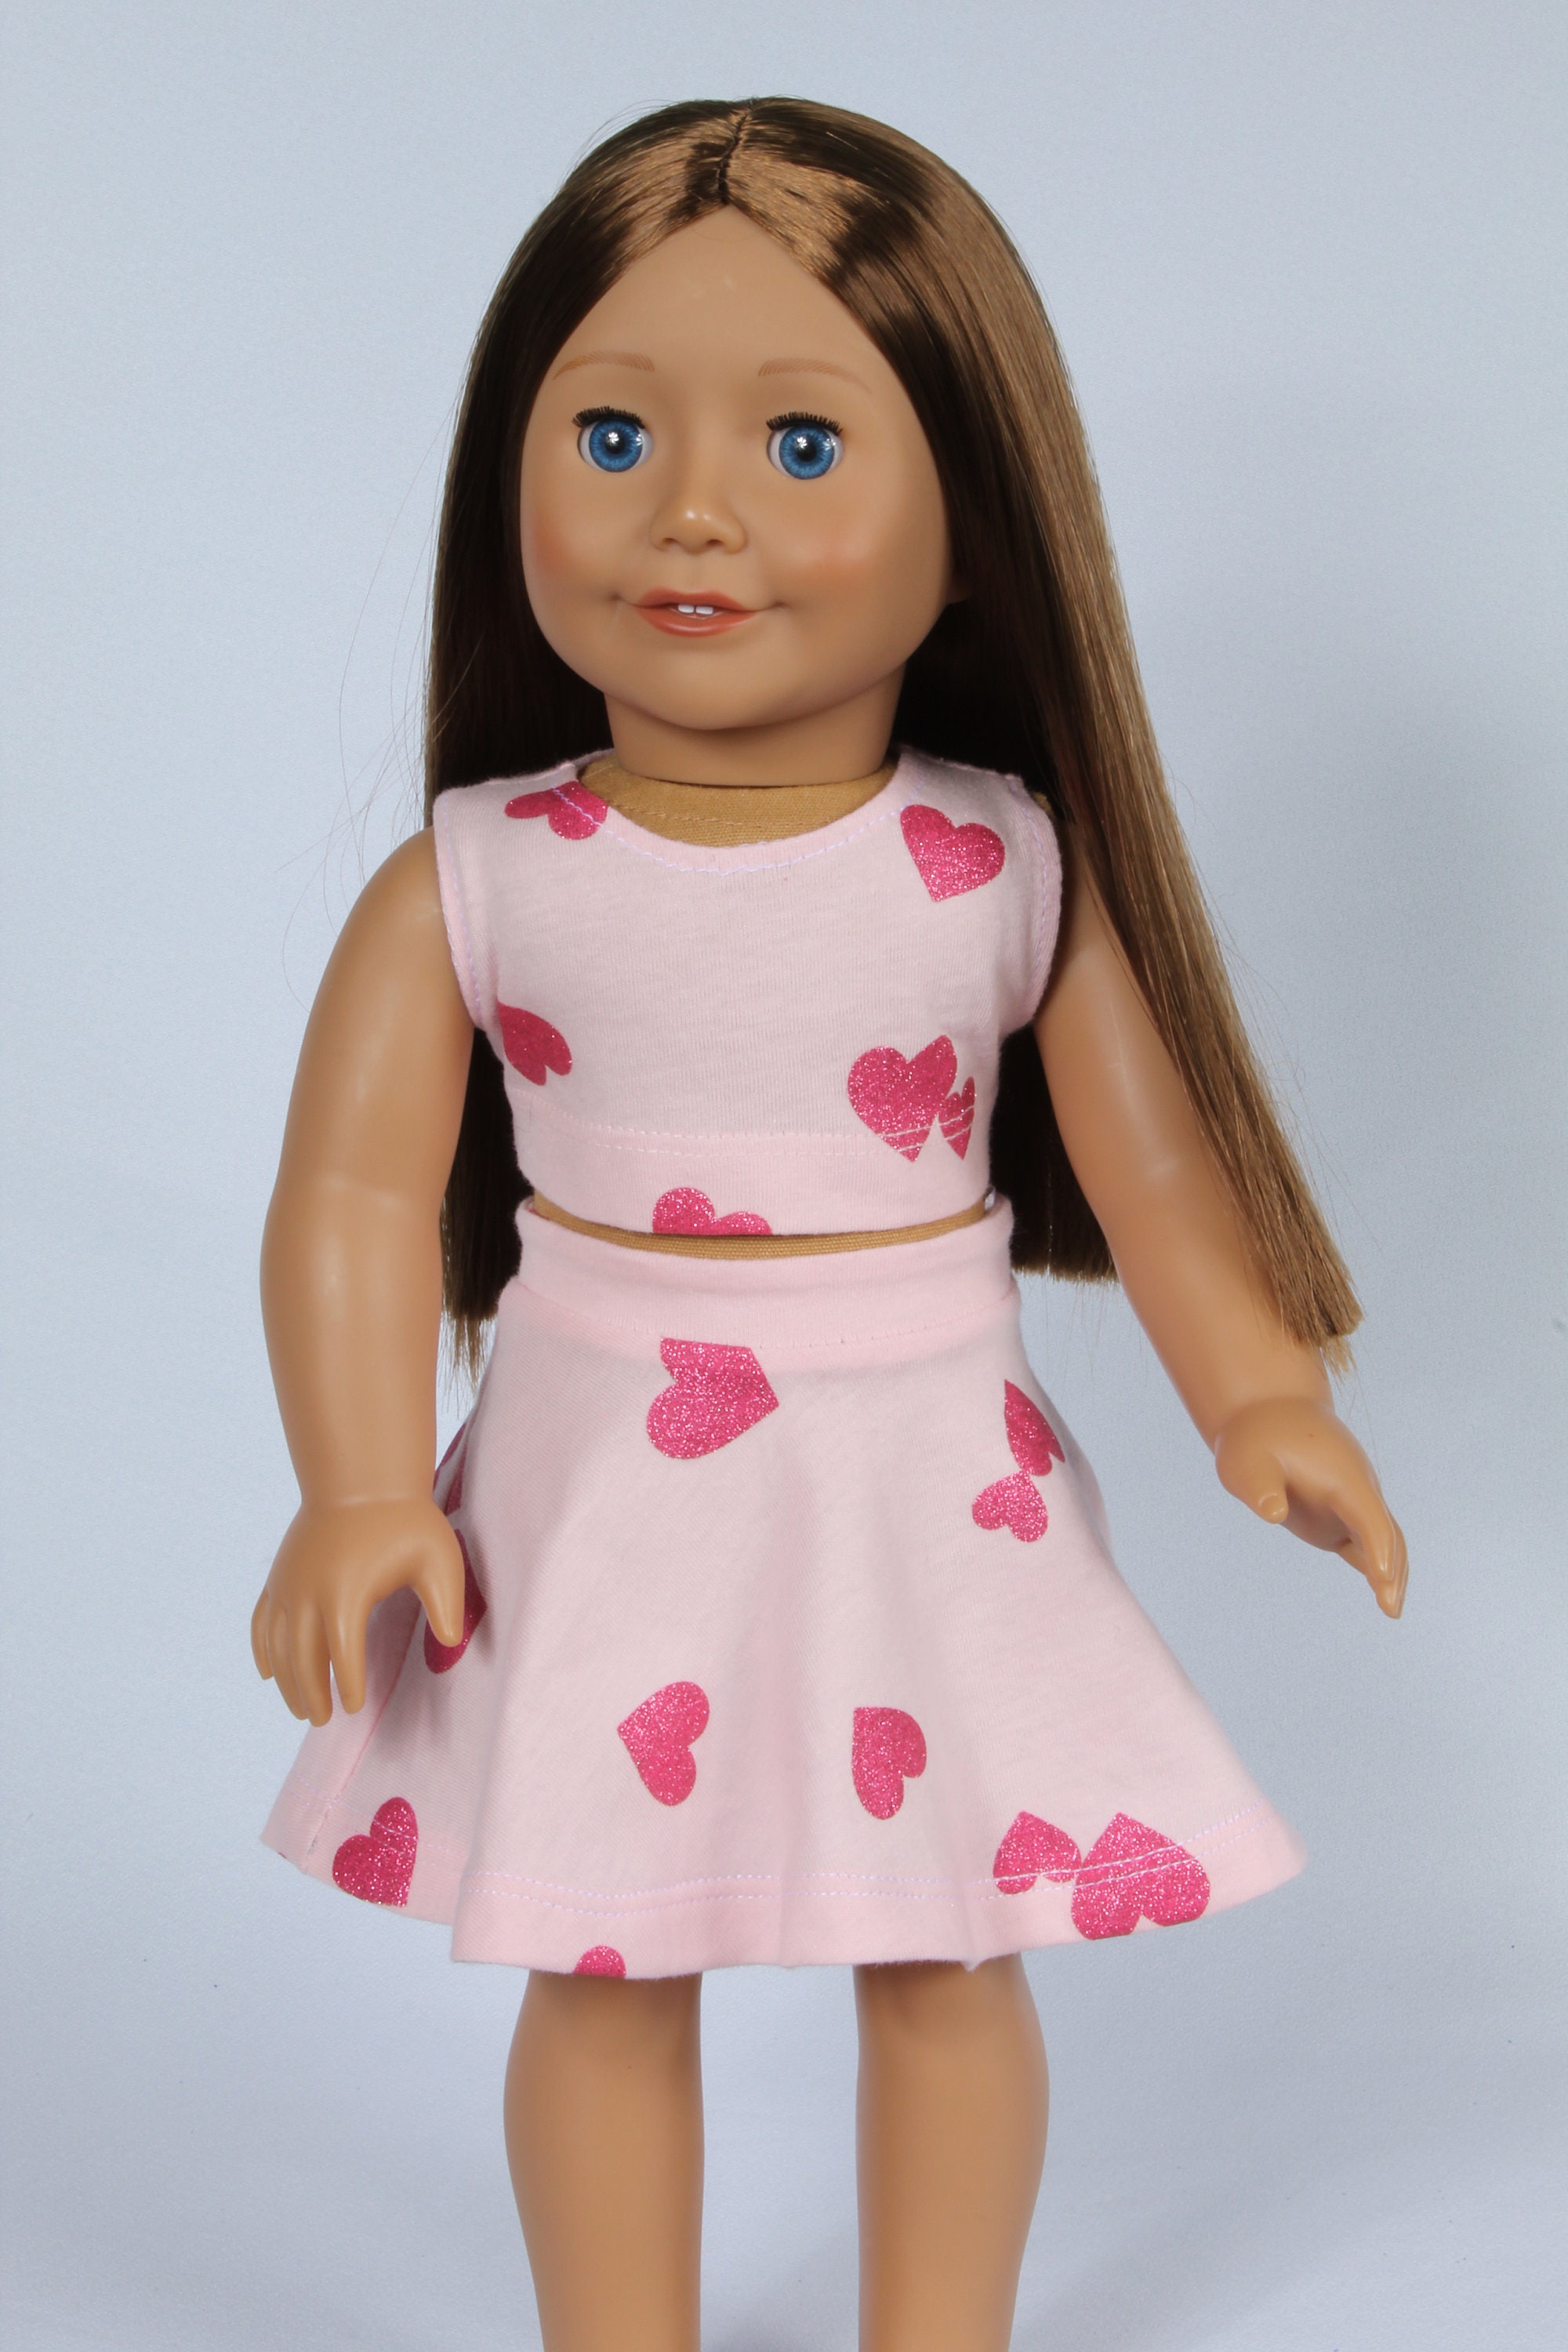 Matching Crop Top and Skater Skirt for 18 Inch Dolls - Etsy